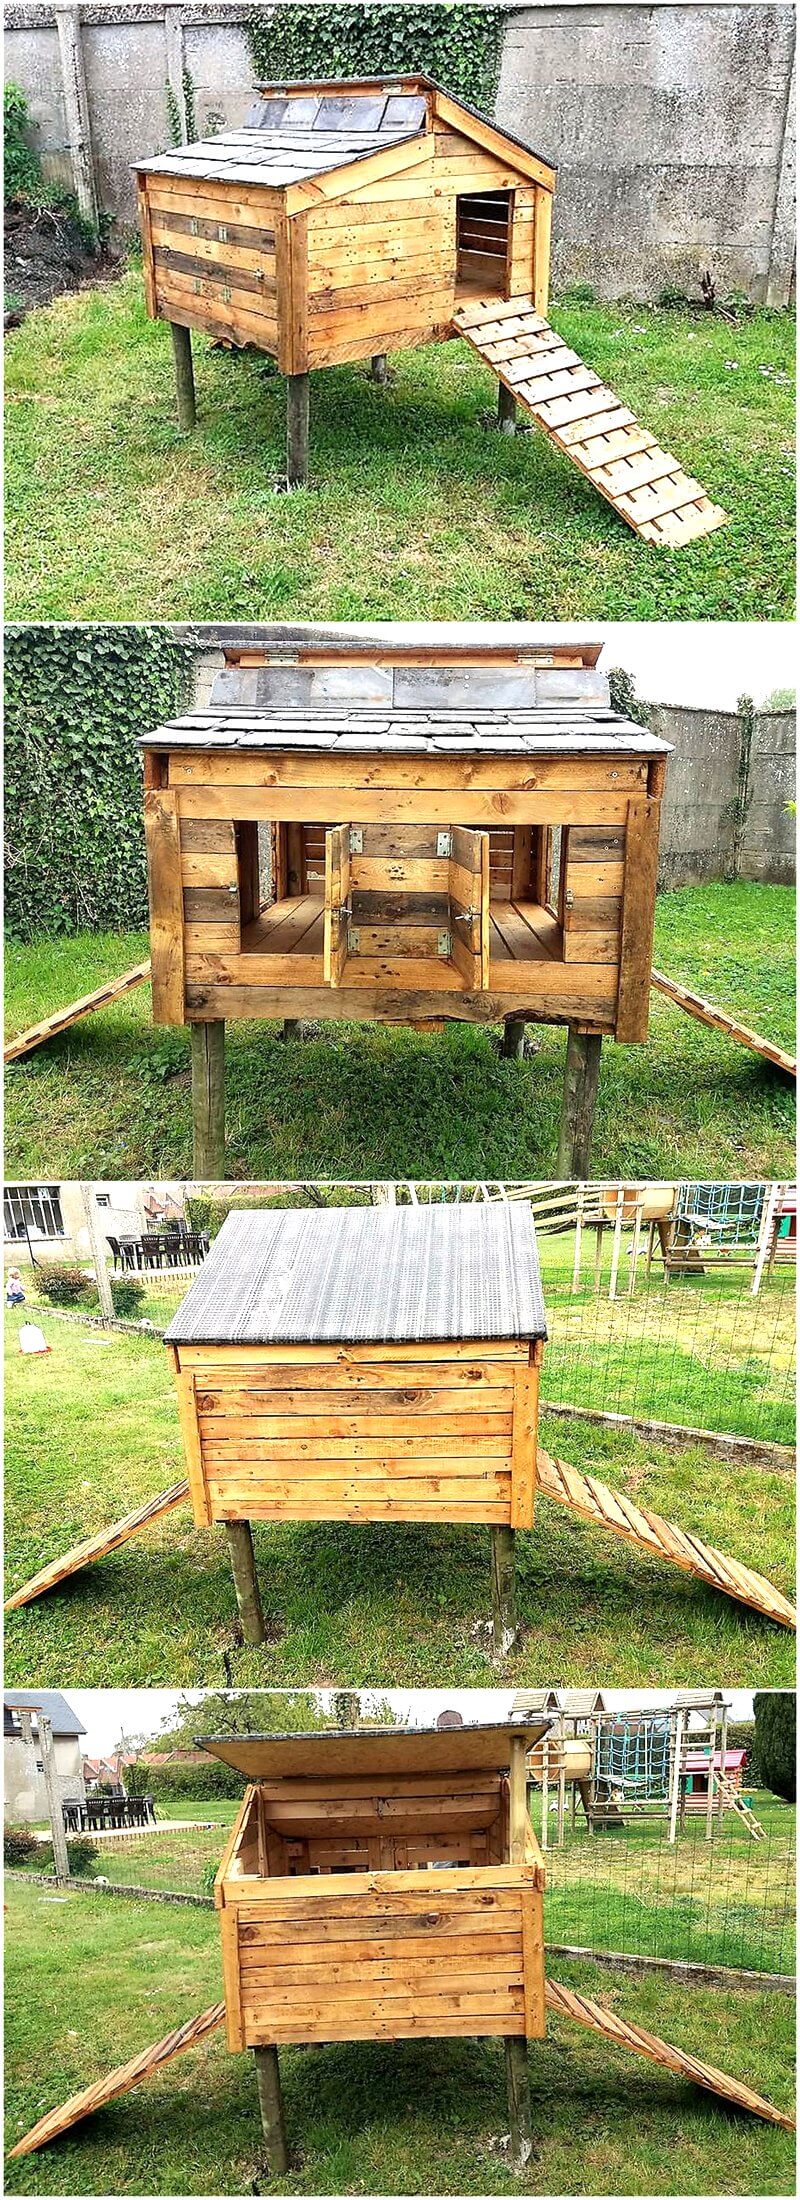 Chicken Coop Out of Recycled Wooden Pallets